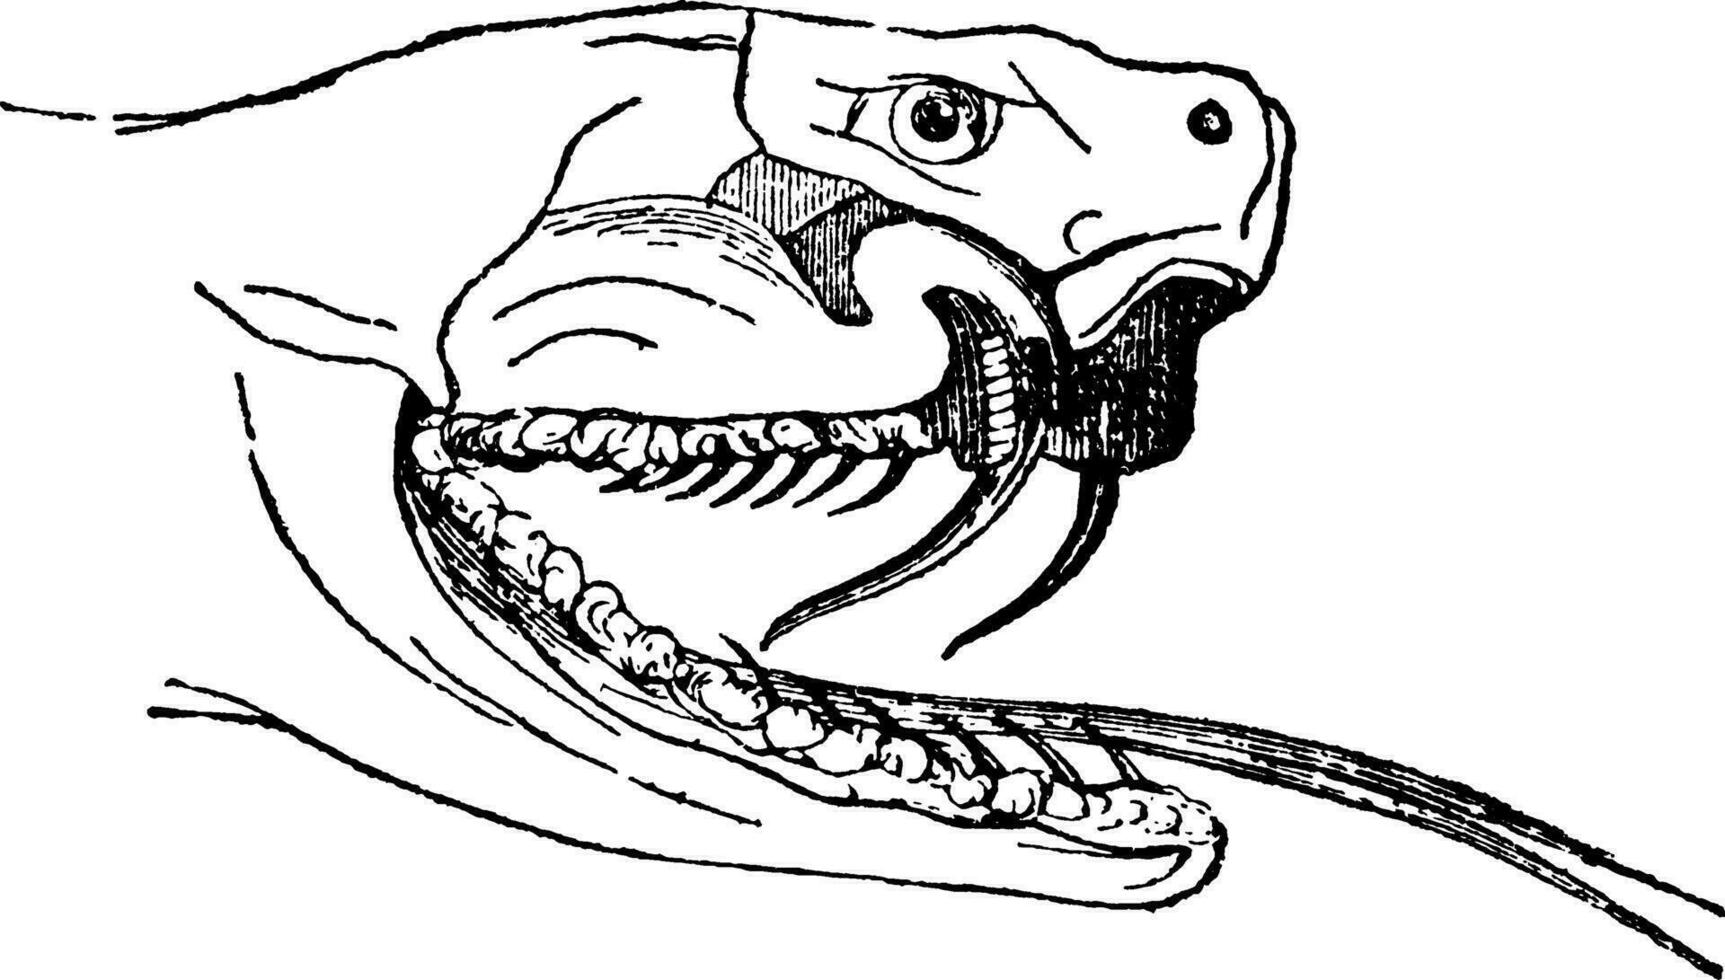 Fangs and Tongue of an Adder, vintage illustration. vector